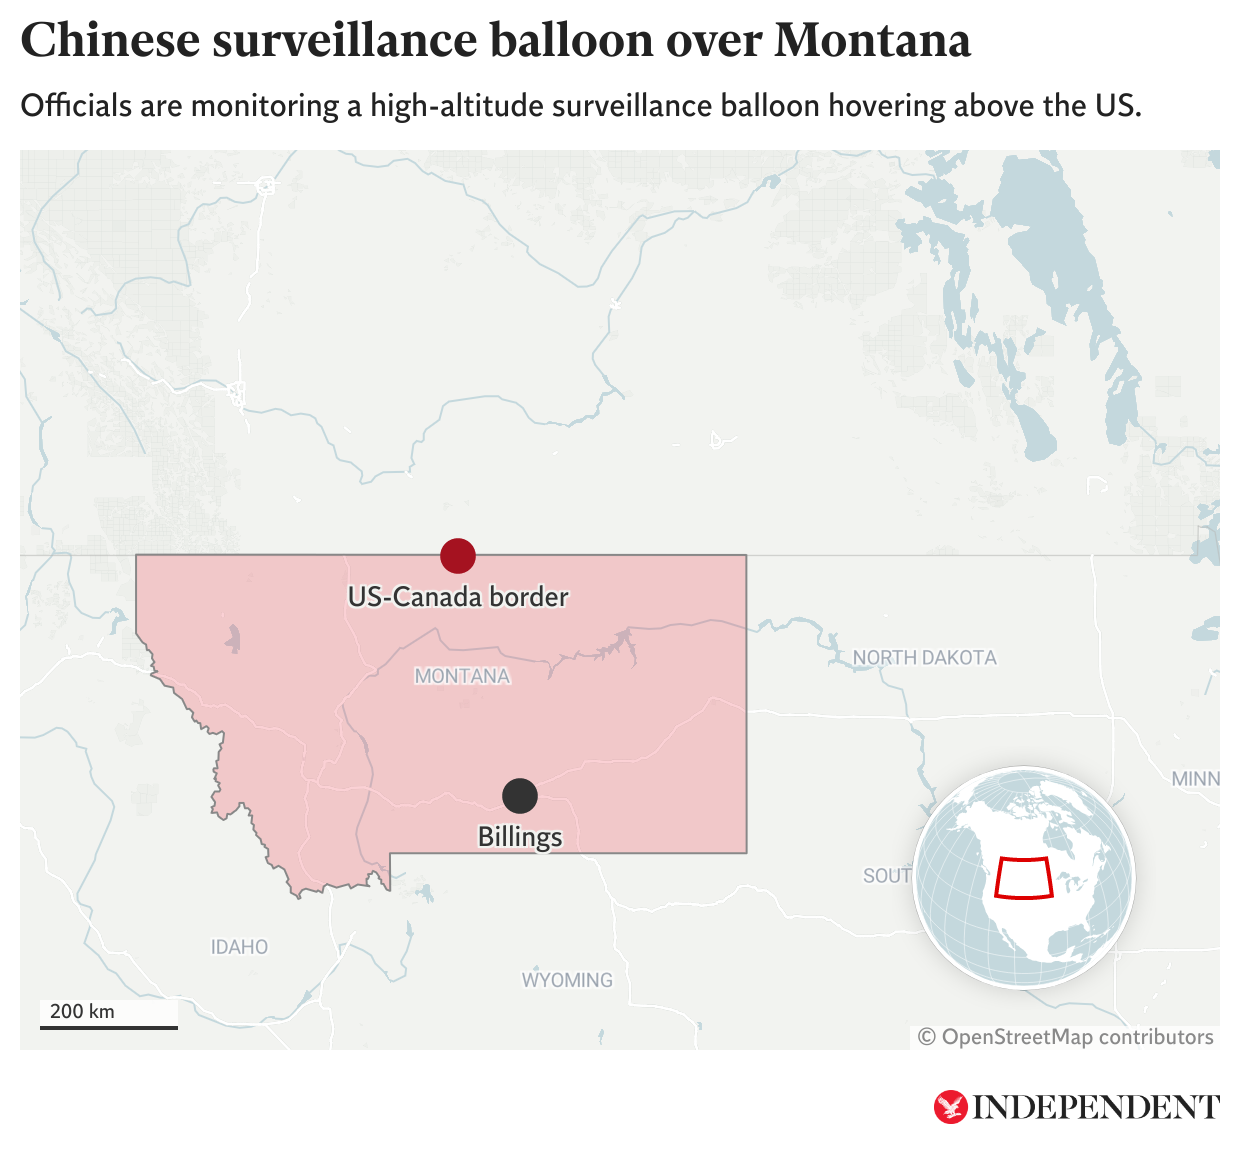 A map showing reported sighting of an alleged Chinese surveillance balloon over US airspace